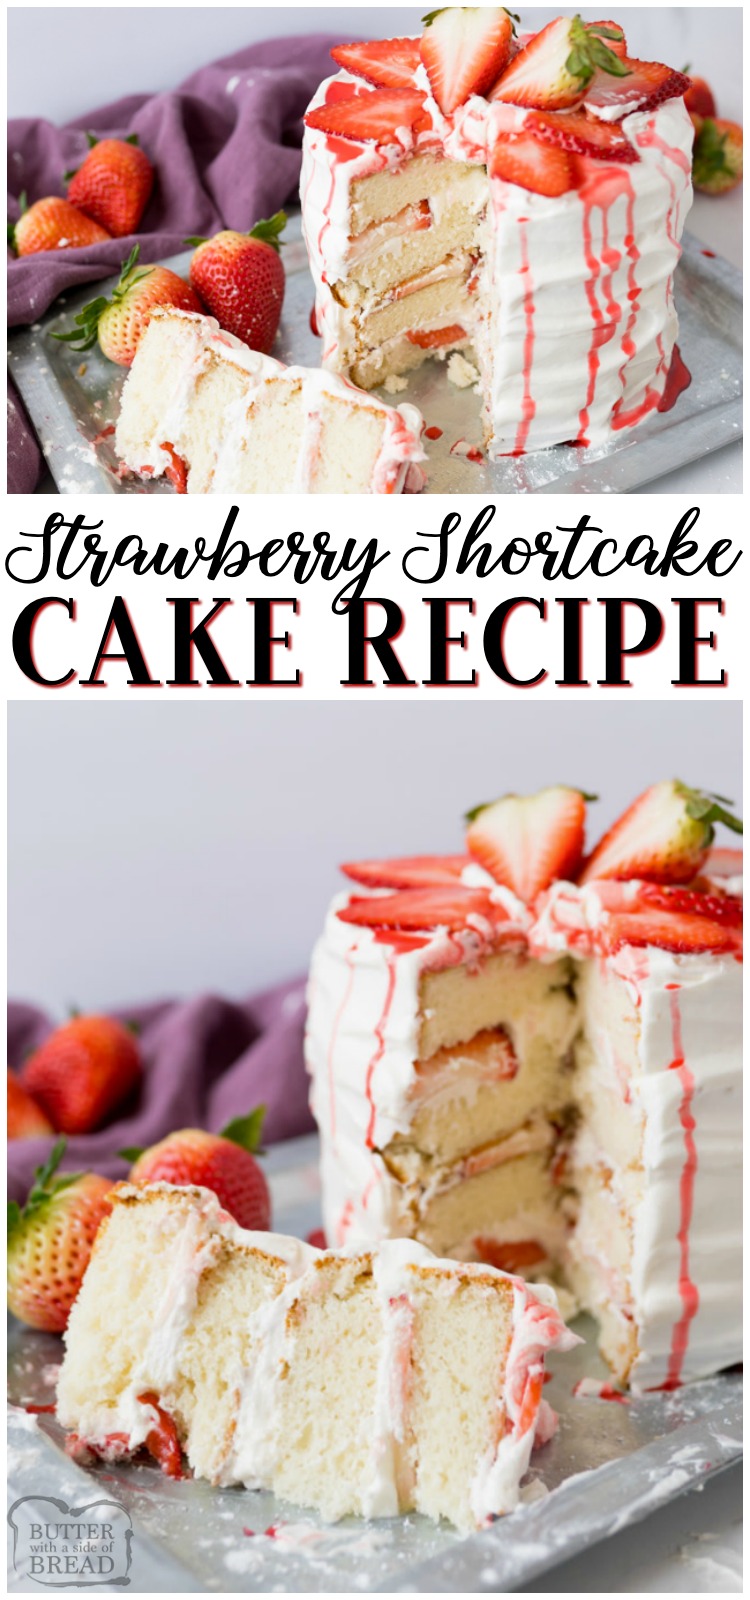 Strawberry Shortcake Cake is a gorgeous vanilla cake filled with whipped vanilla frosting and fresh strawberries. Lovely strawberry shortcake layers make up this easy & elegant strawberry cake. #cake #strawberry #shortcake #strawberries #baking #dessert #recipe from BUTTER WITH A SIDE OF BREAD